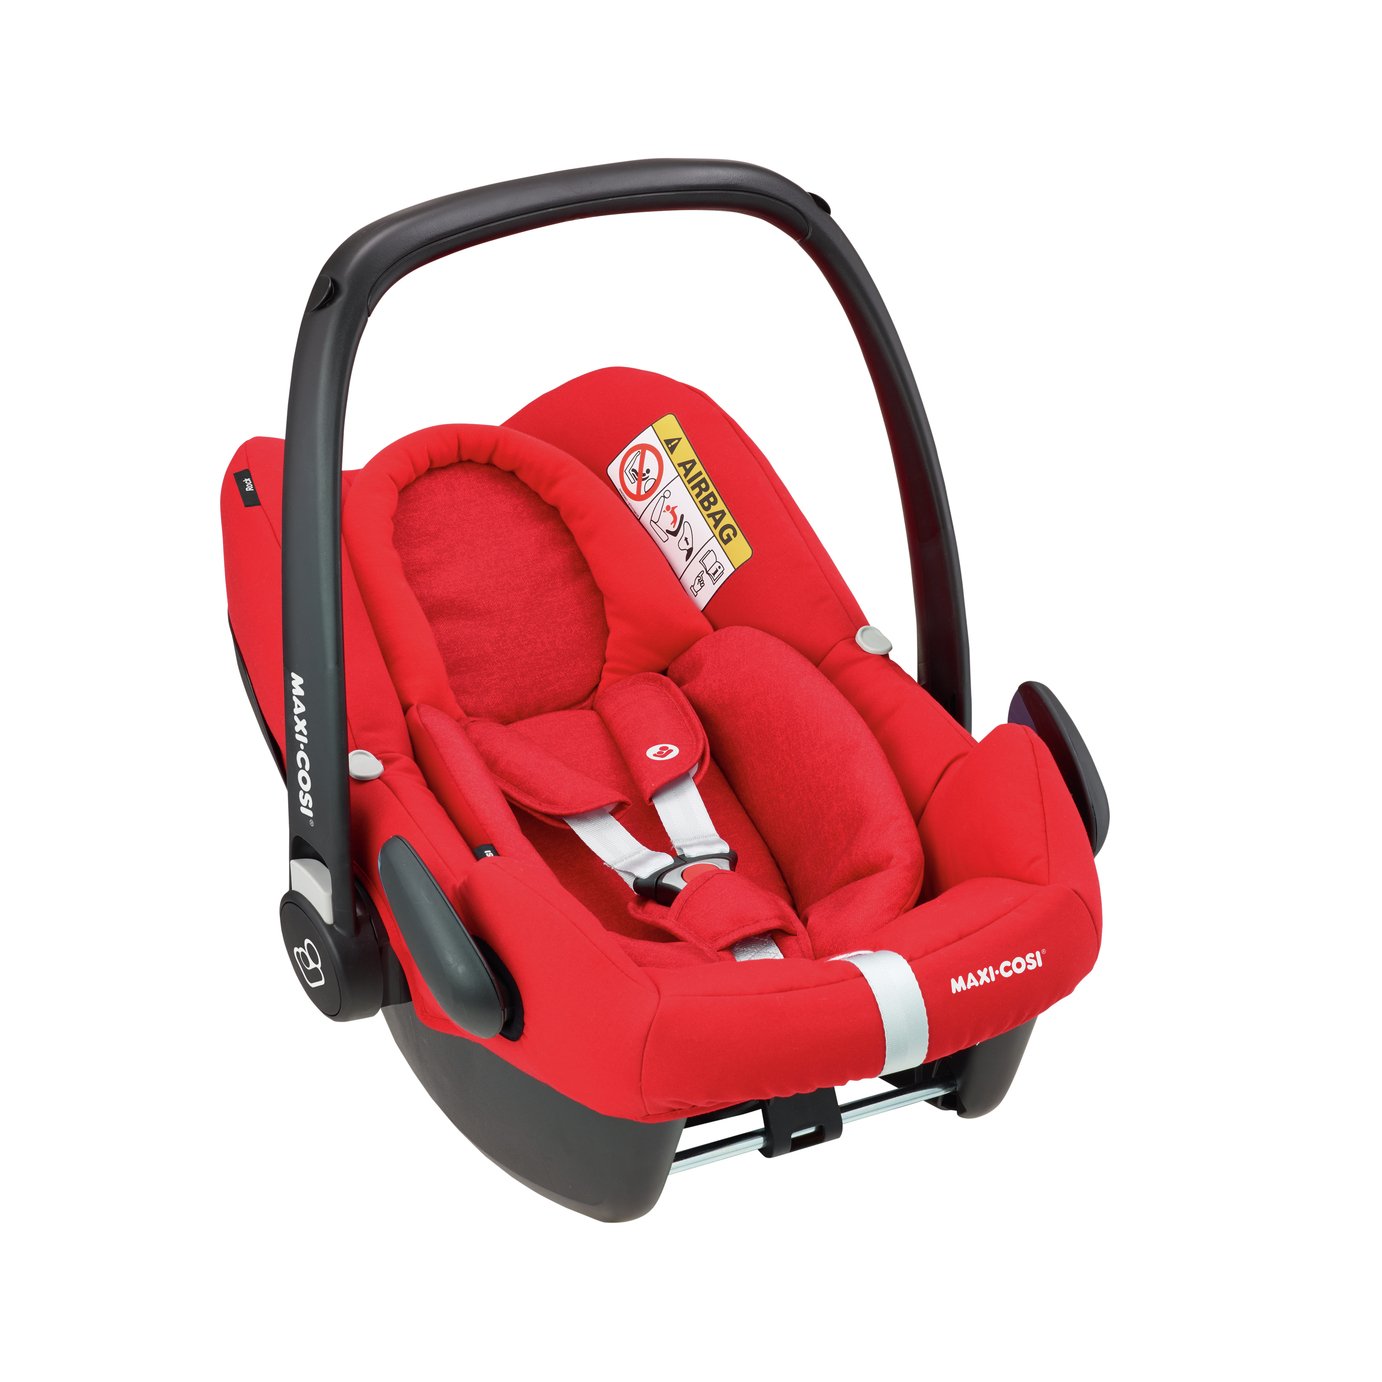 Maxi-Cosi Rock Group 0+ i-Size Baby Car Seat - Nomad Red